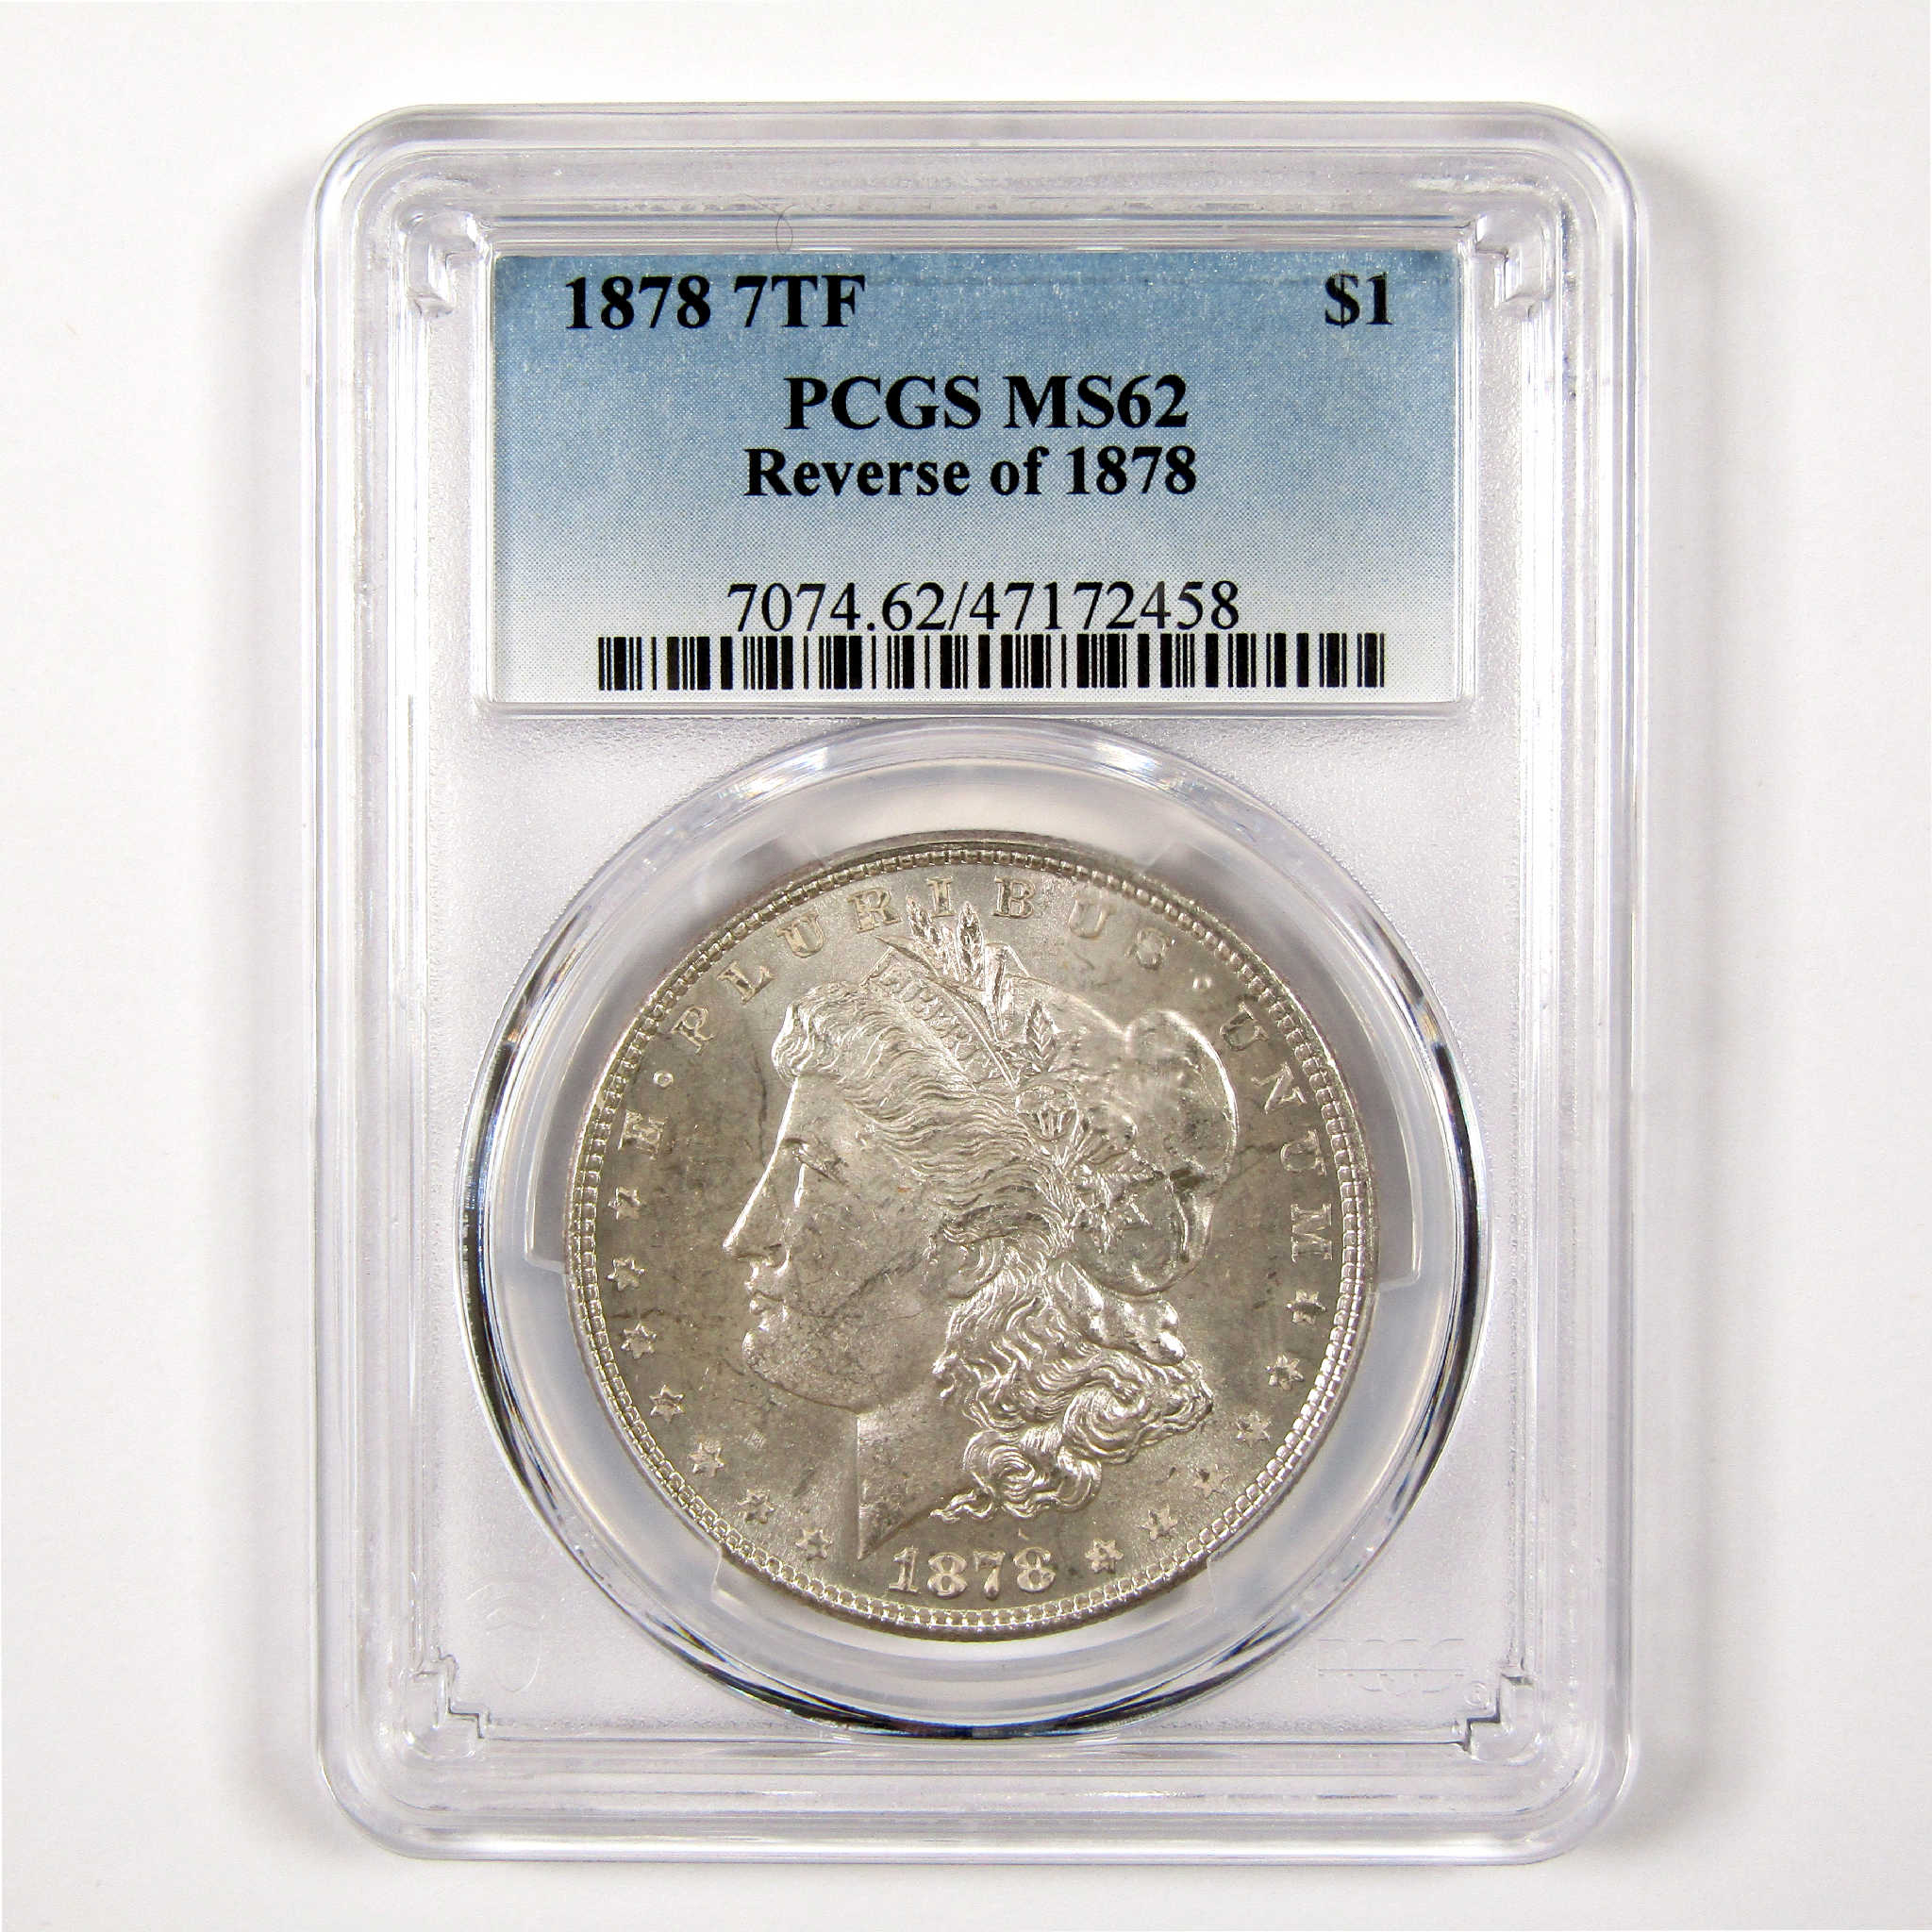 1878 7TF Rev 78 Morgan Dollar MS 62 PCGS Silver $1 Unc SKU:I11321 - Morgan coin - Morgan silver dollar - Morgan silver dollar for sale - Profile Coins &amp; Collectibles